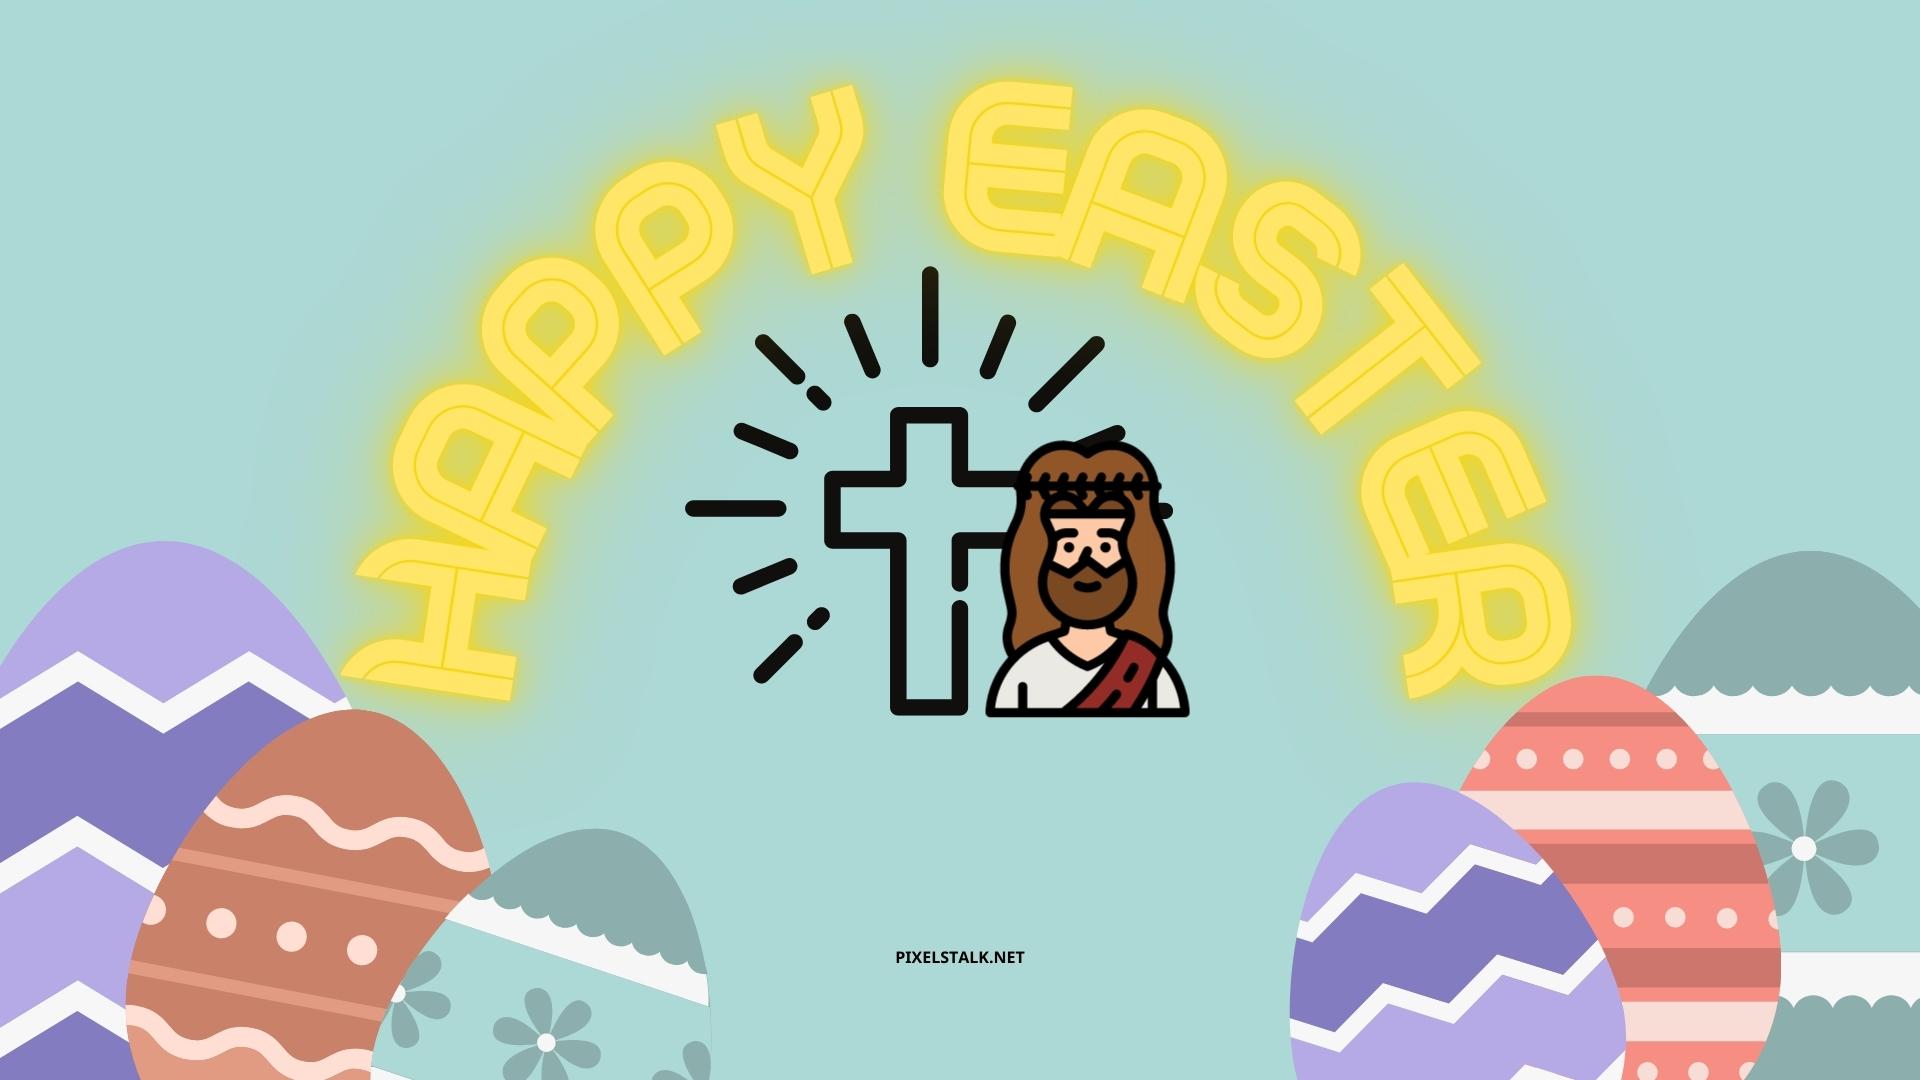 Christian Easter Wallpaper HD Free download